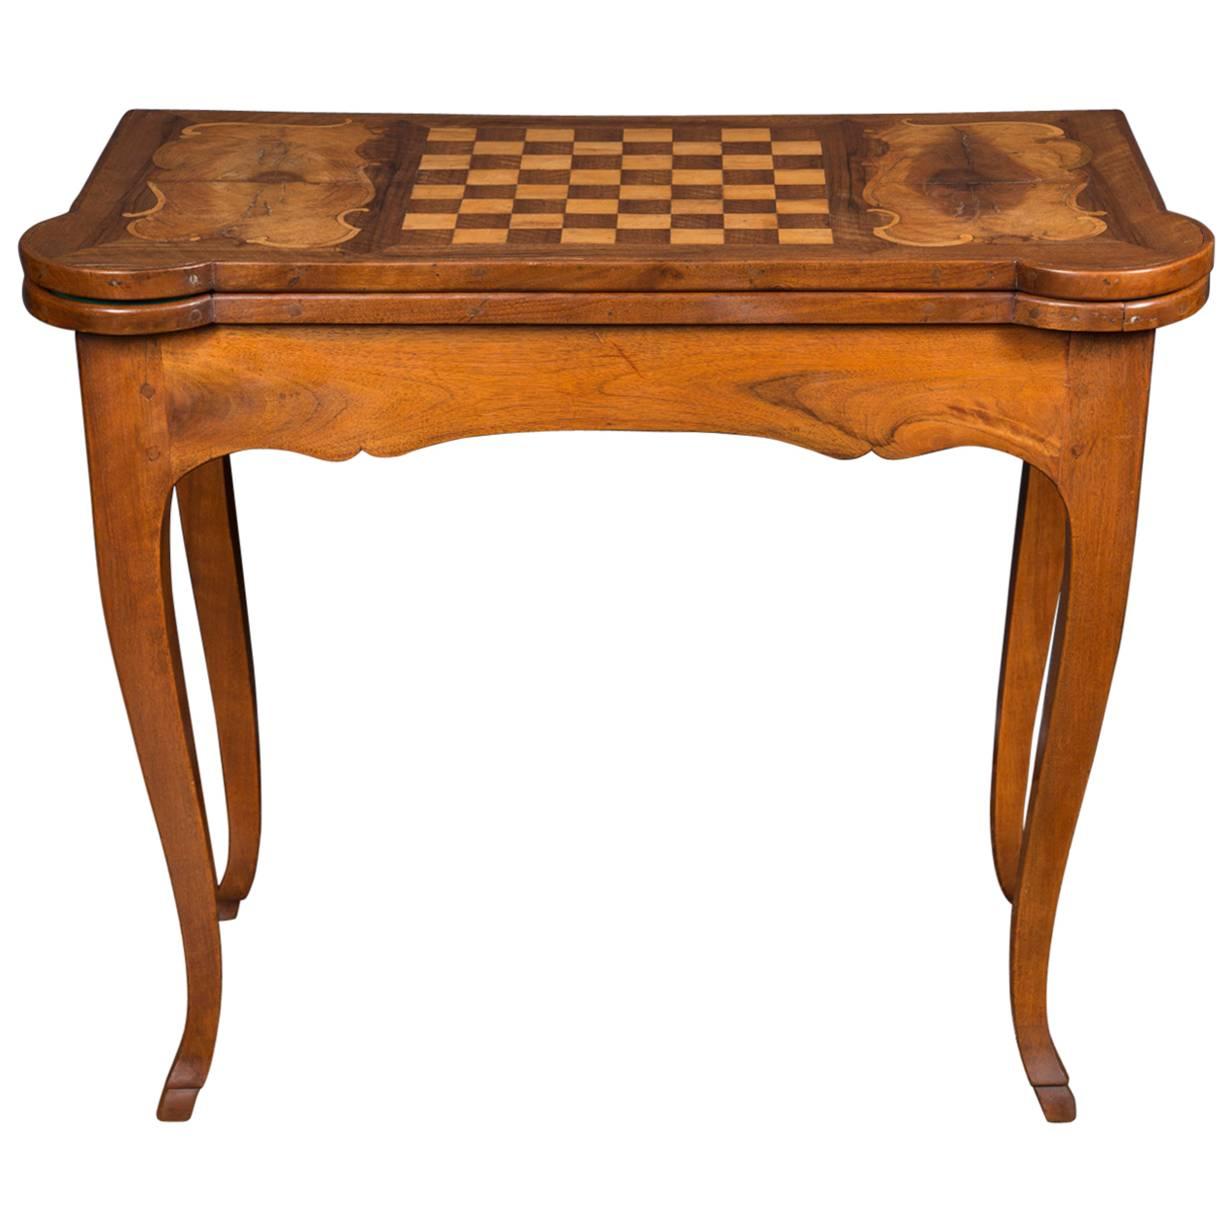 French 18th Century Louis XV Expanding Game Table, Signed “Hache a Grenoble” For Sale